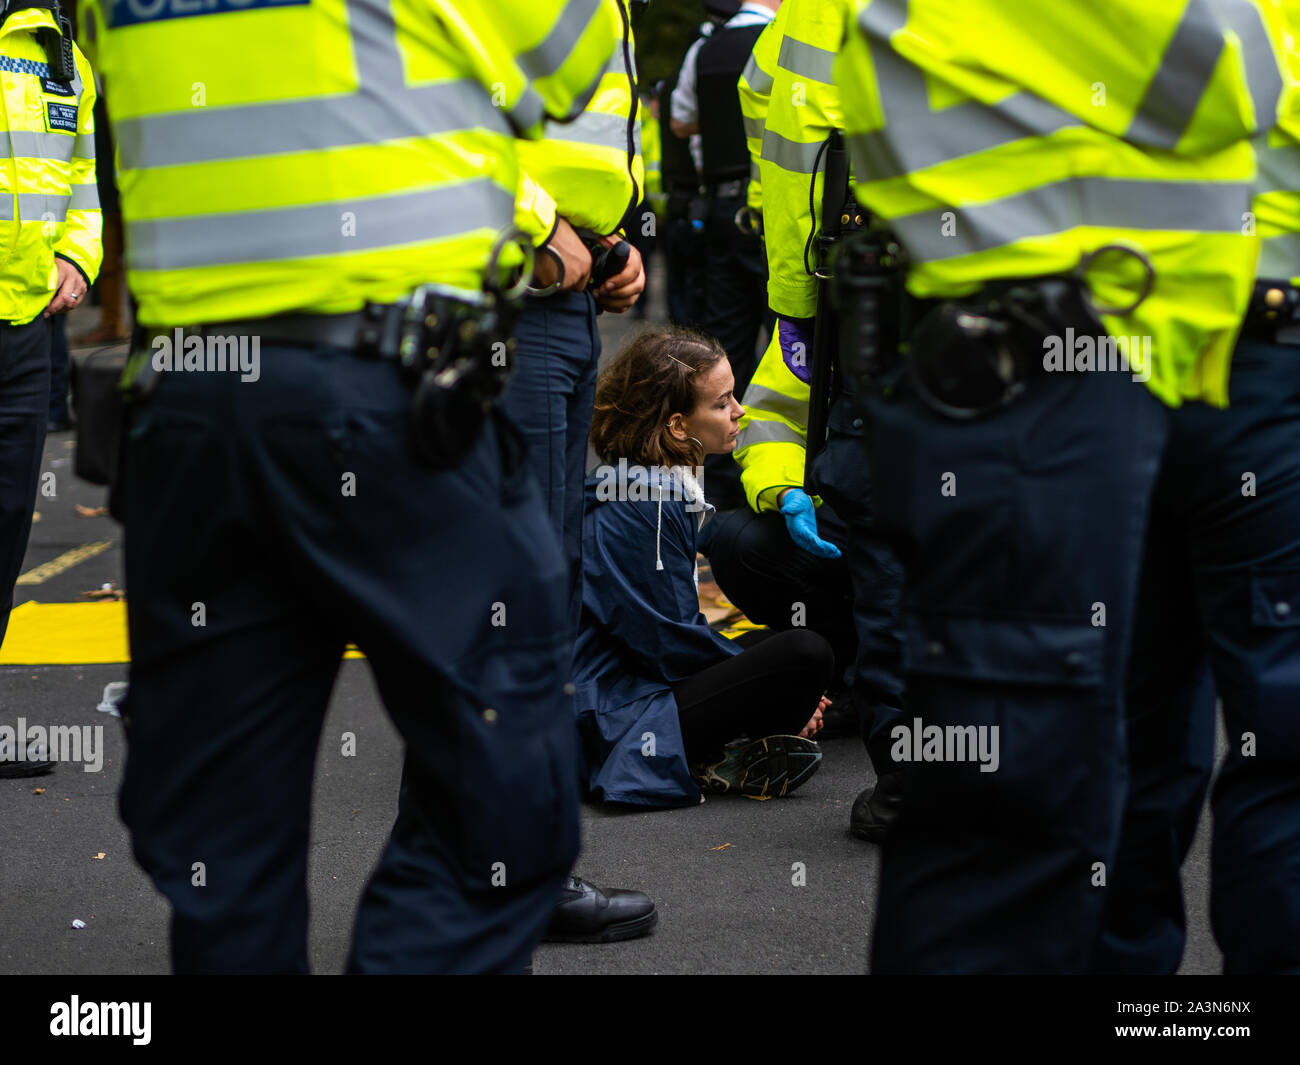 A young demonstrator was surrounded by policemen when they moved the line. One of the policemen was trying to convince her to move. Stock Photo